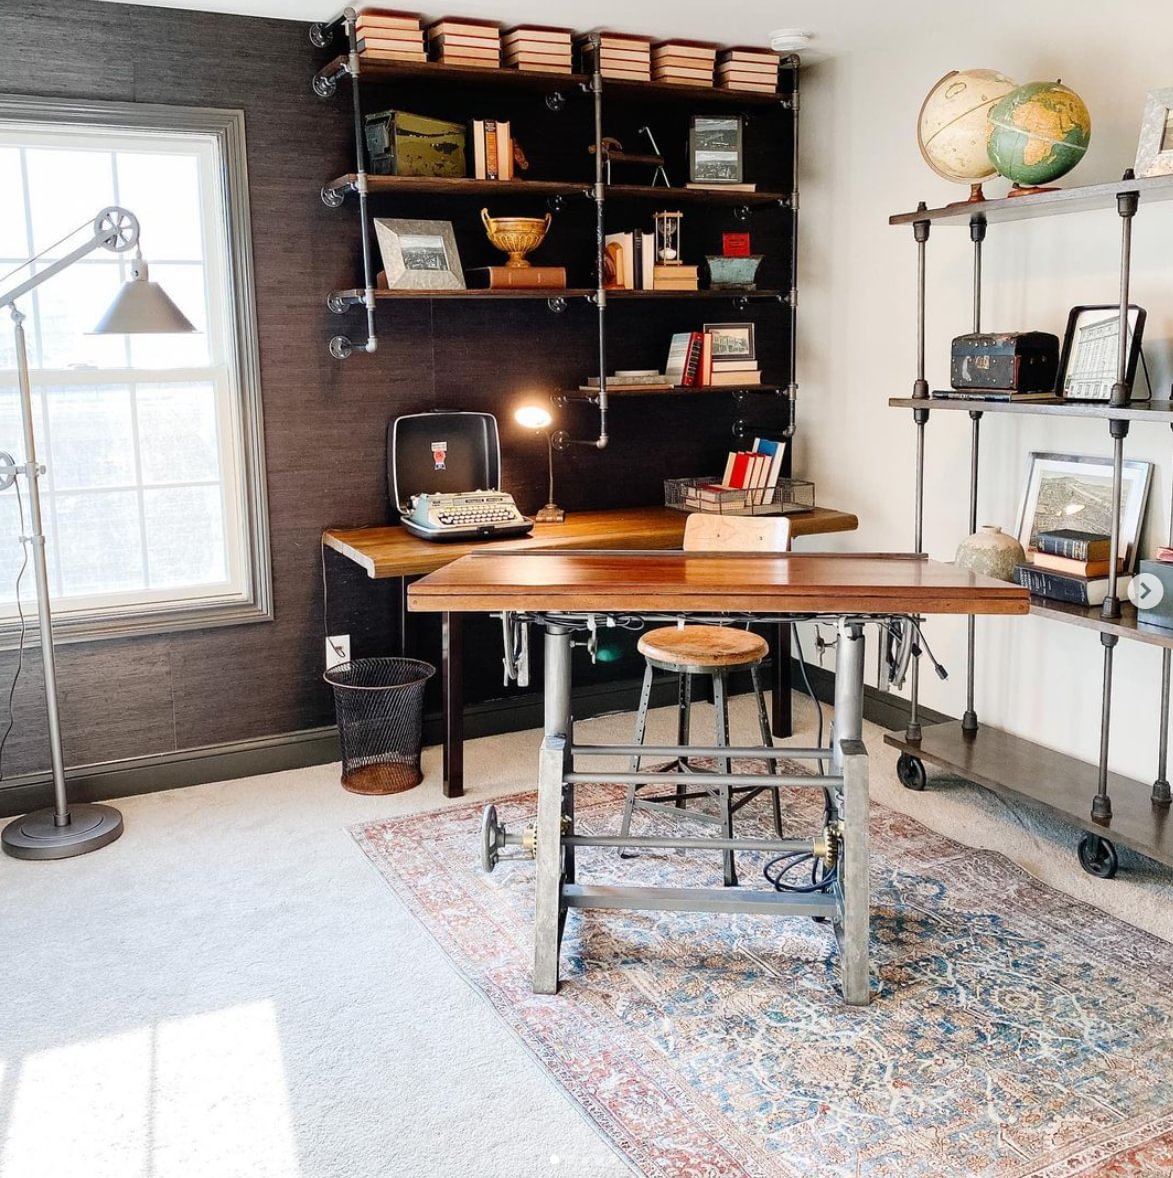 An industrial themed office with metal shelving and a wooden desk